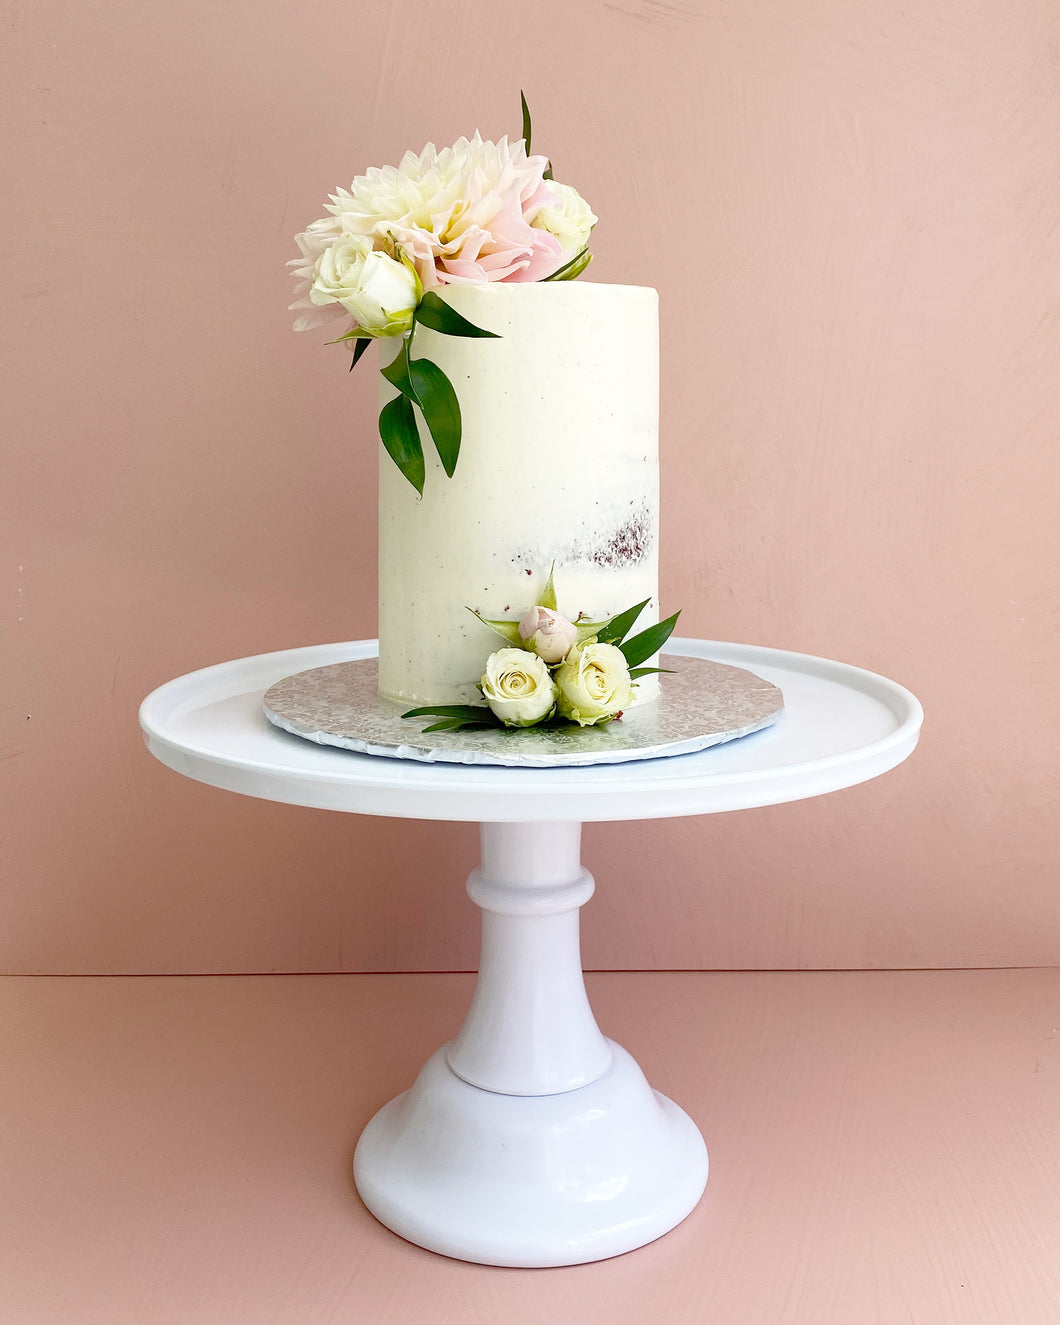 The Naked Floral Cake